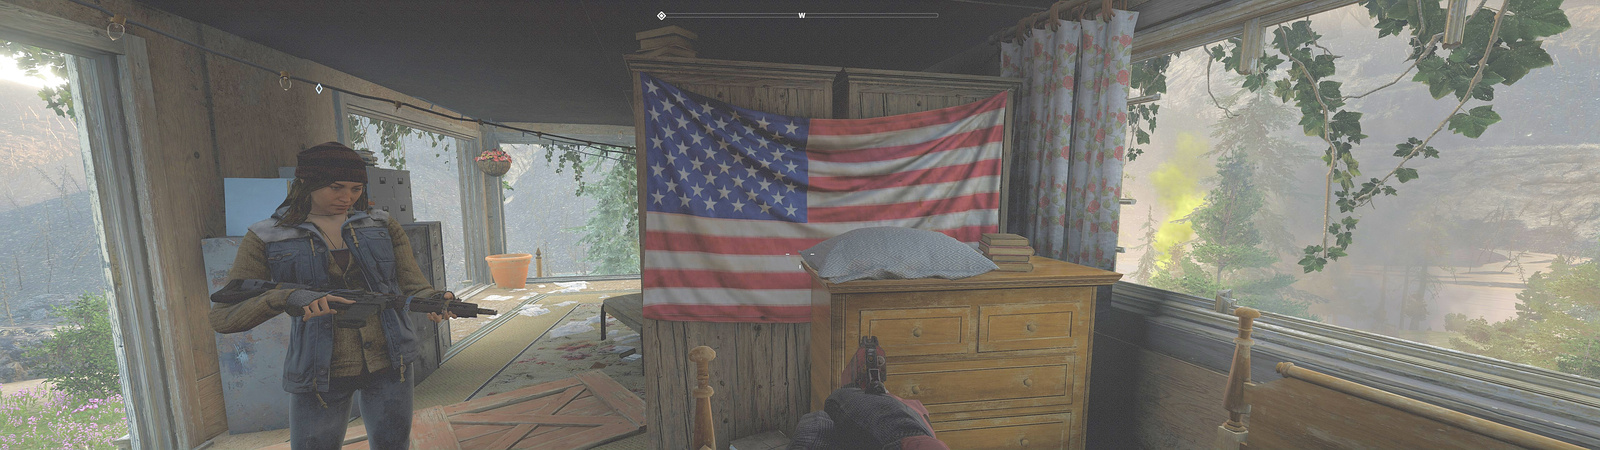 First person view in a trailer holding a handgun with a girl holding a rifle and an American flag behind an old dresser